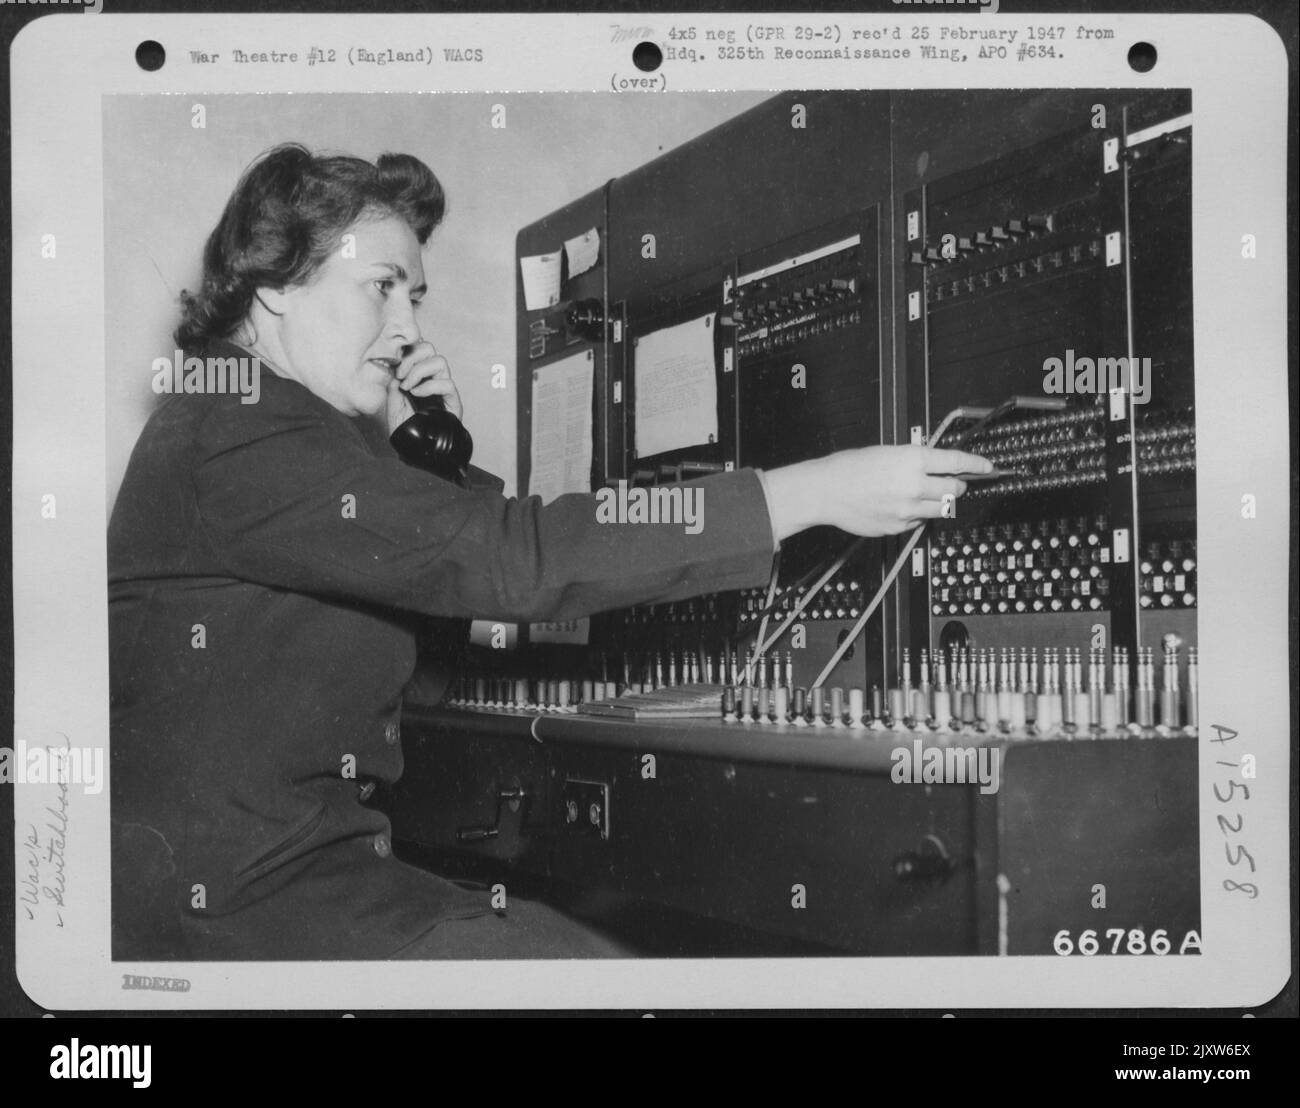 Wac Of The Viii Bomber Command Works At A Switchboard. England, 13 September 1943. Stock Photo